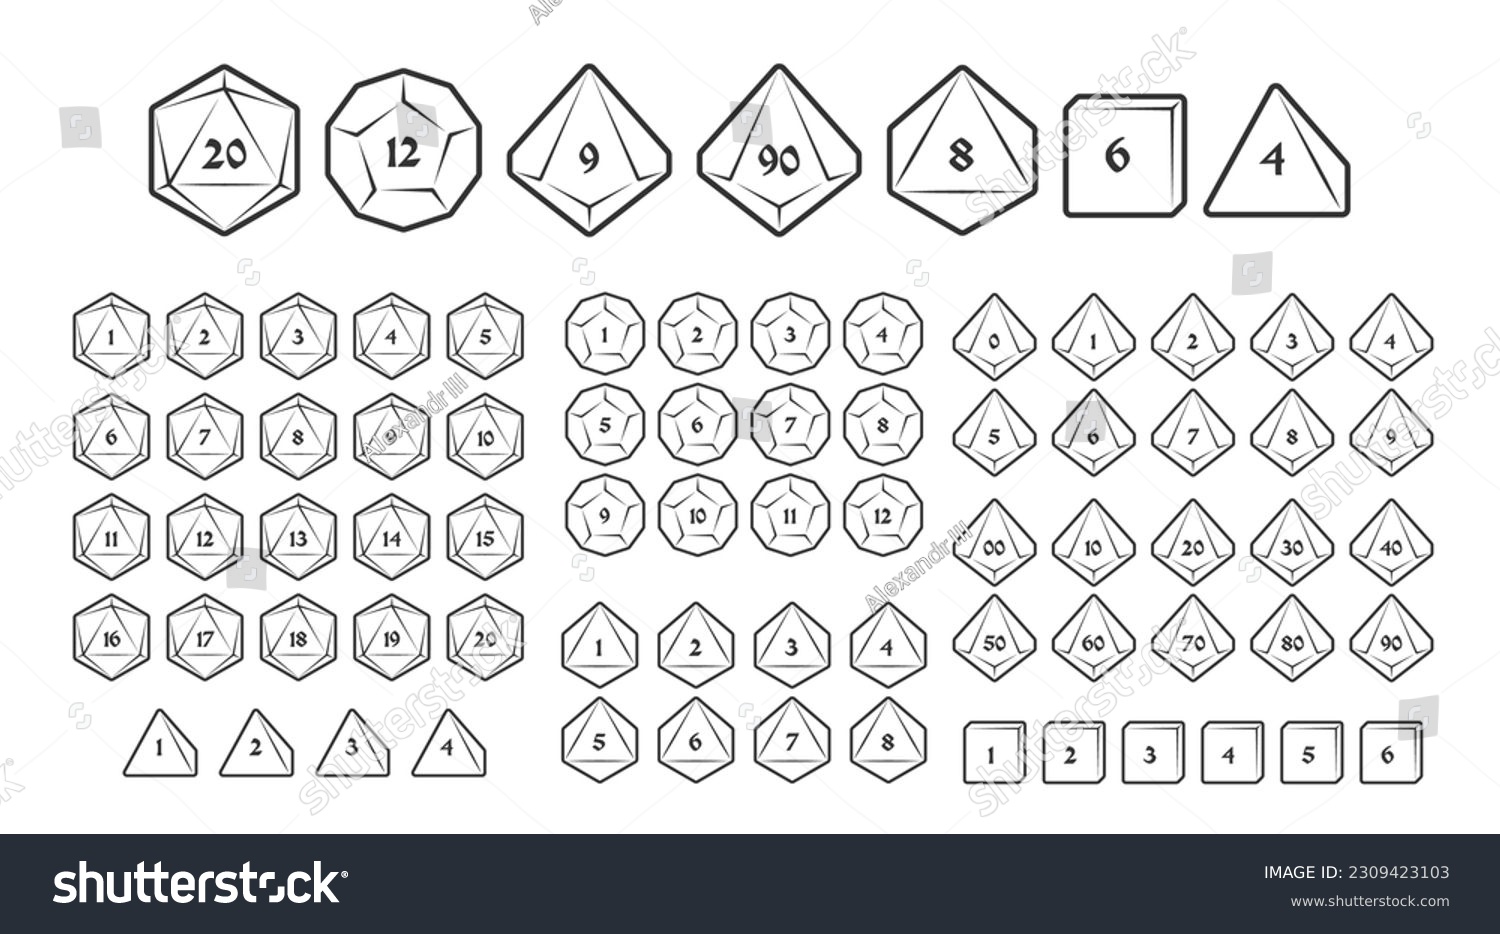 SVG of D4, D6, D8, D10, D12, and D20 Dice Icons for Boardgames With Numbers, Line Style svg